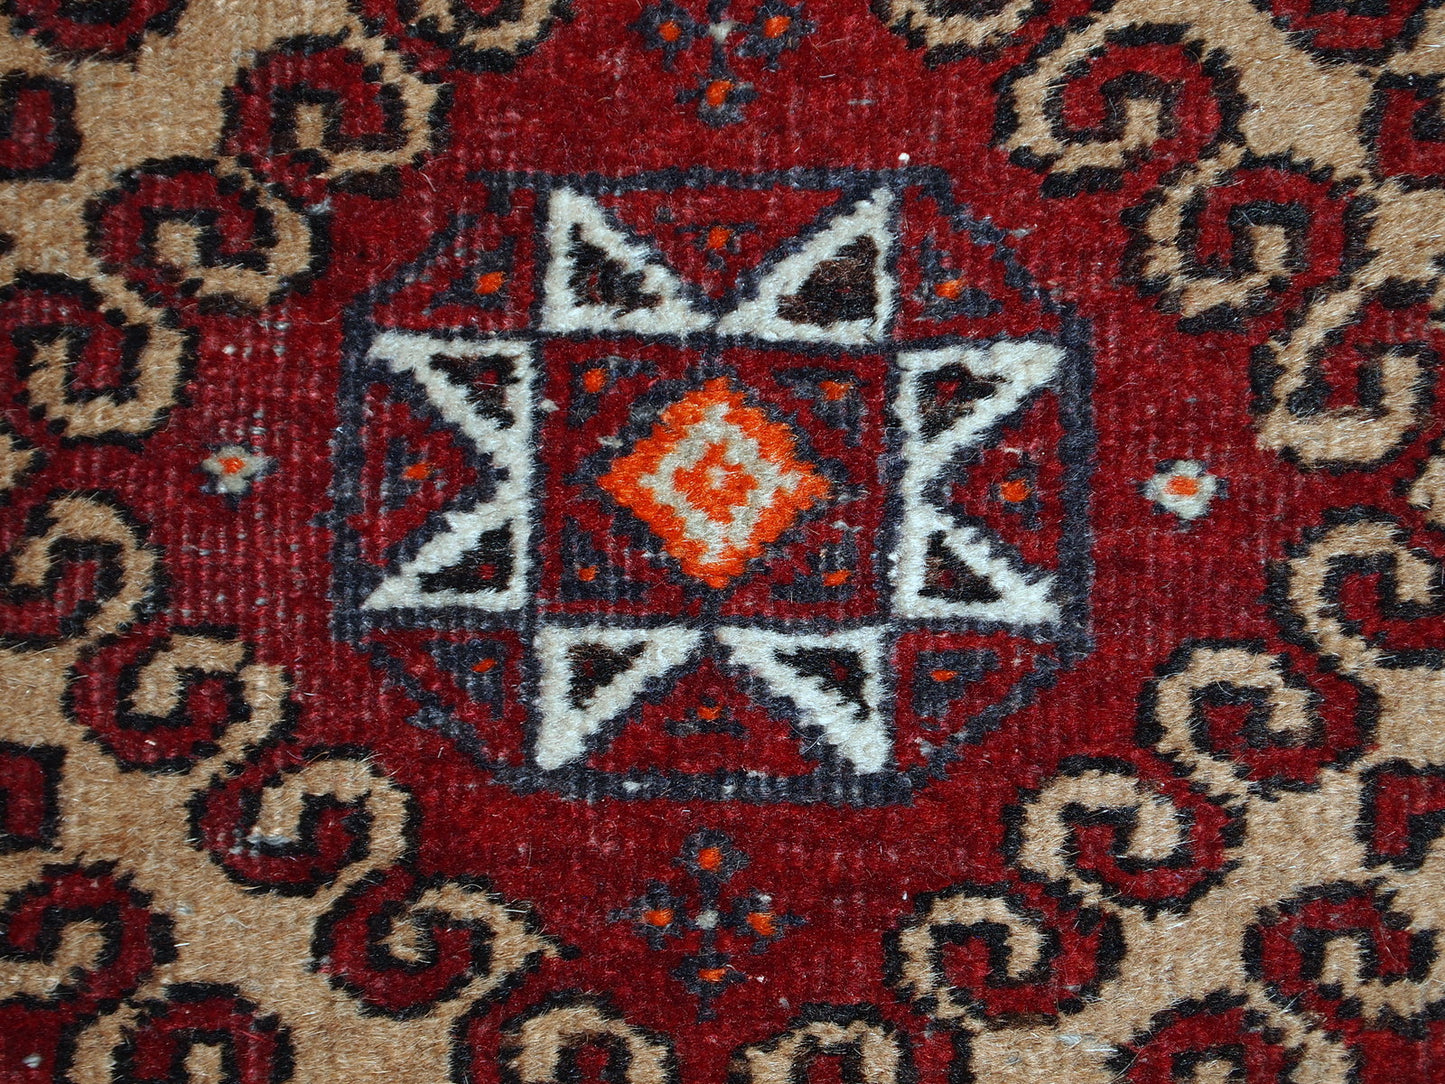 Handmade vintage Afghan Ersari rug in cream beige shade. The rug is in original good condition, made out of wool. The border decorated in little stars. 